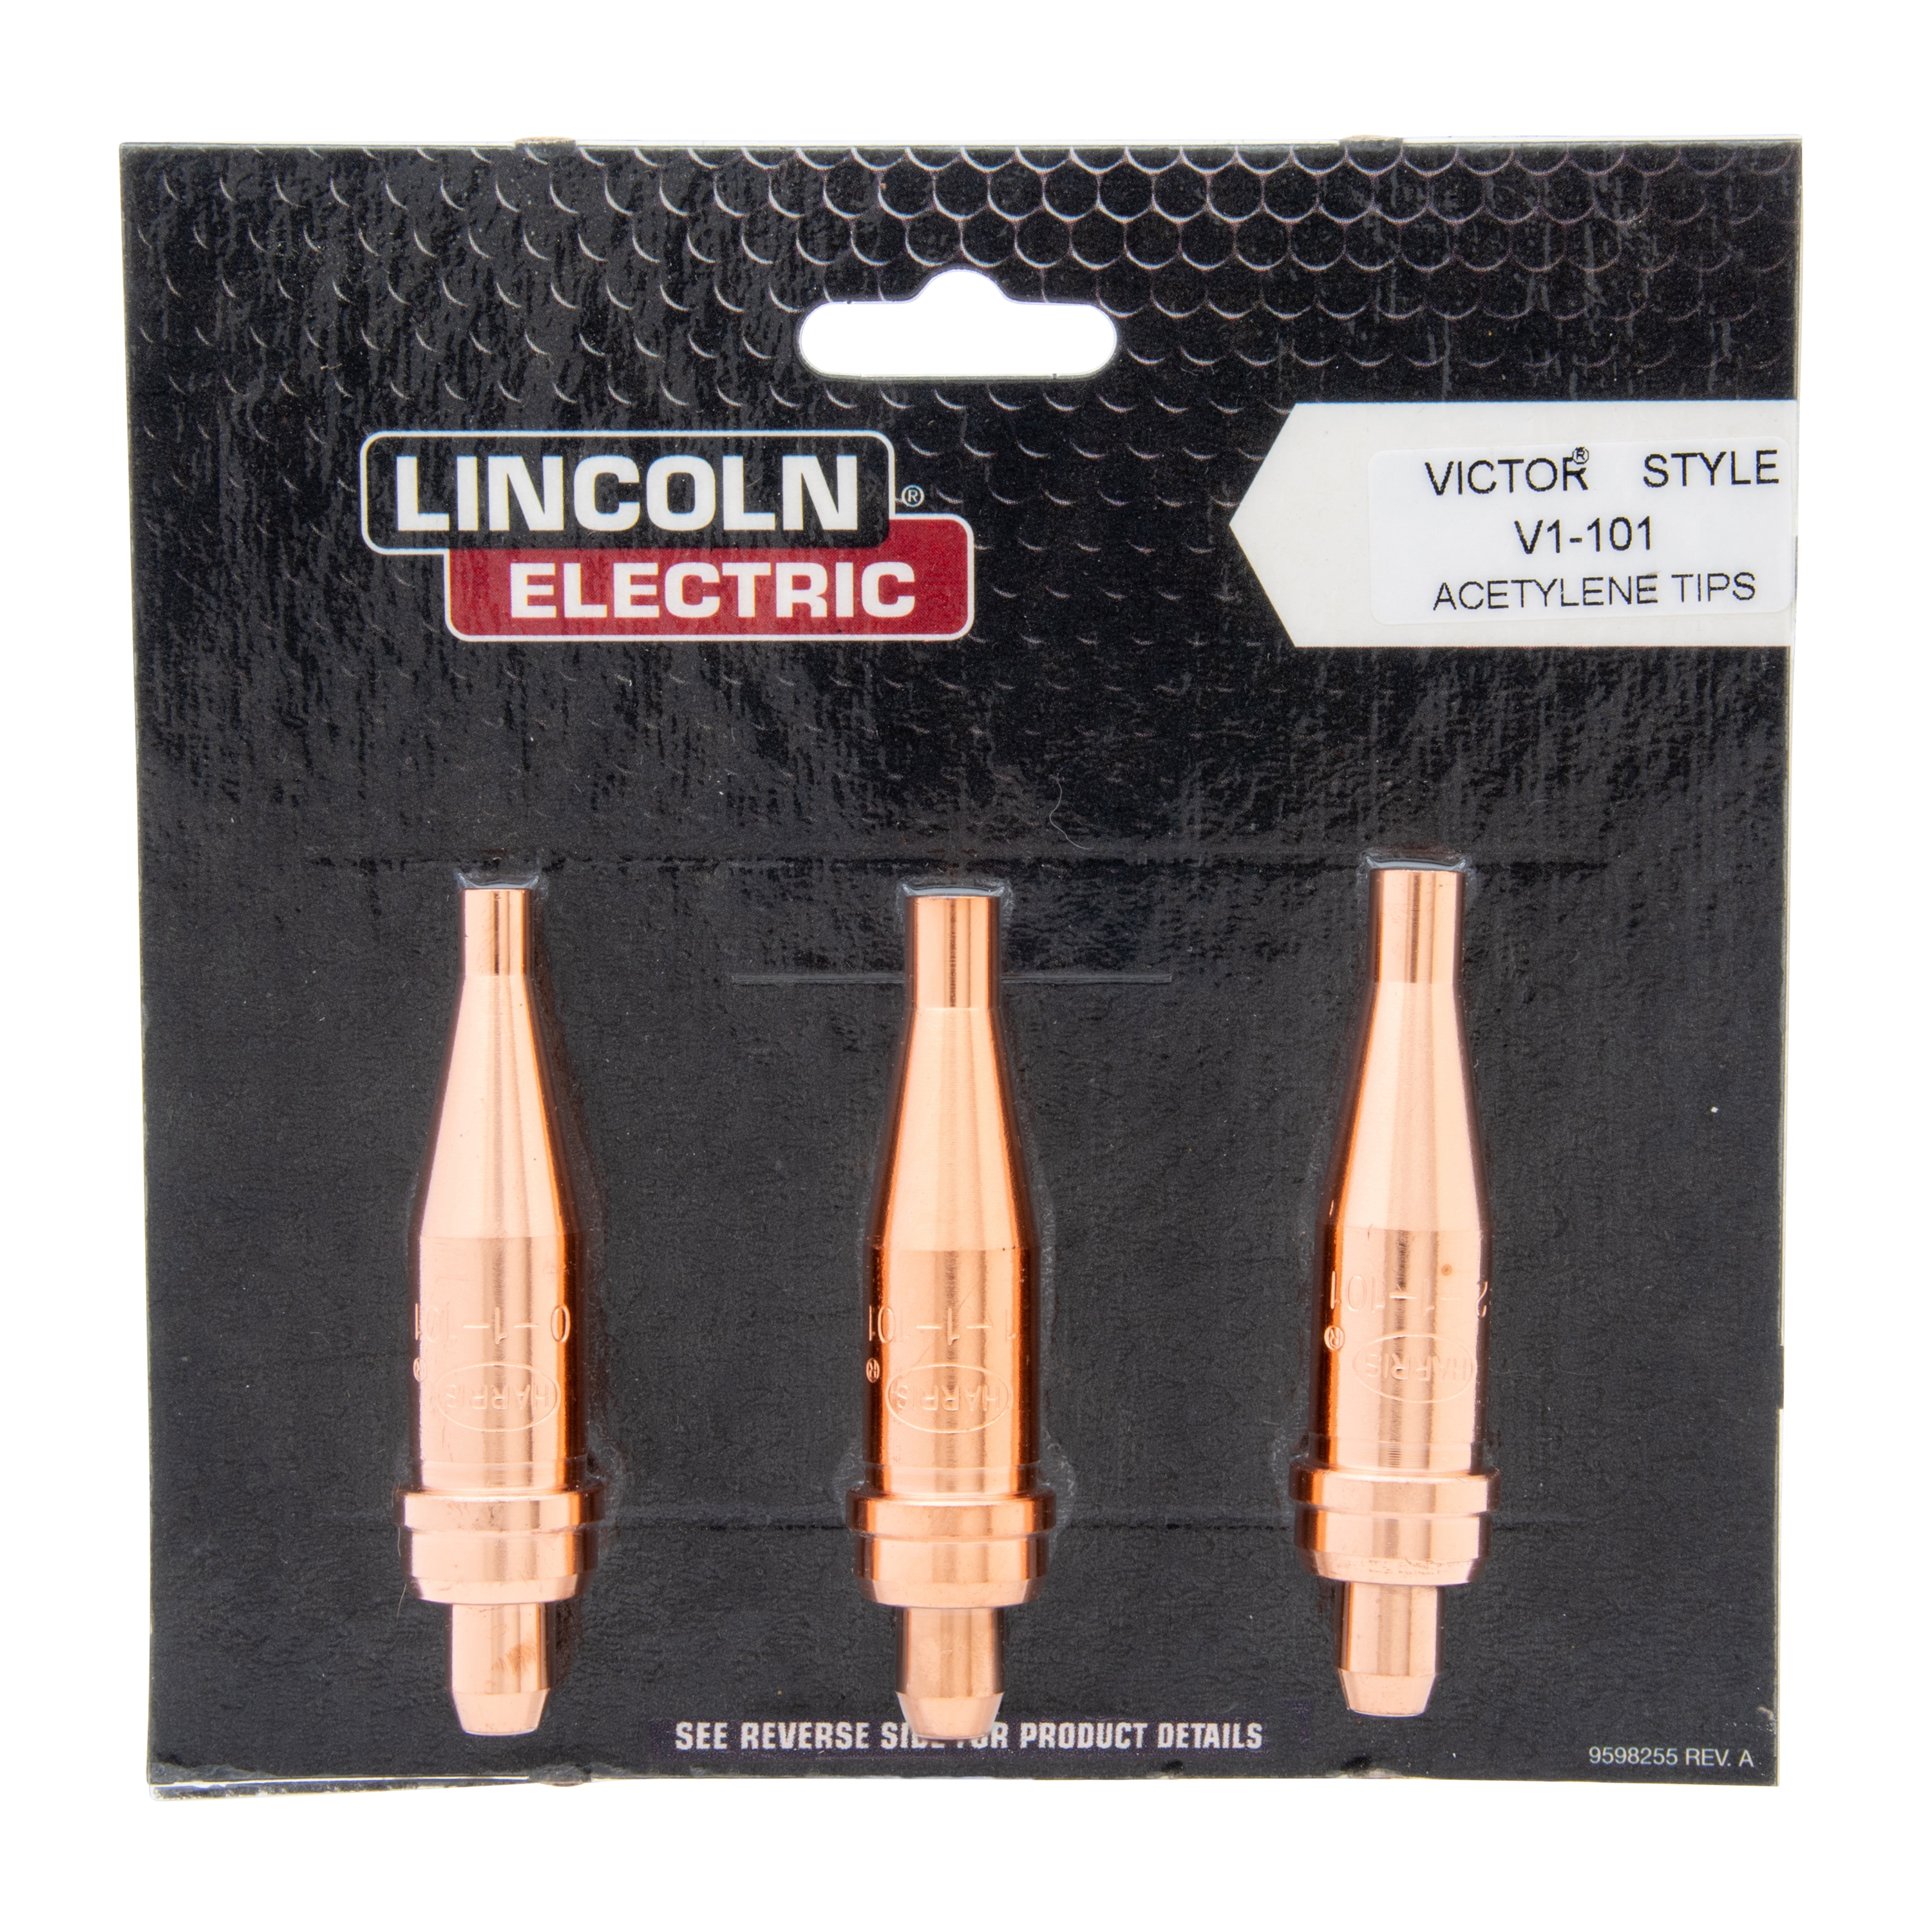 Lincoln Electric K5416-1 Fixturing Kit for Portable Welding Table